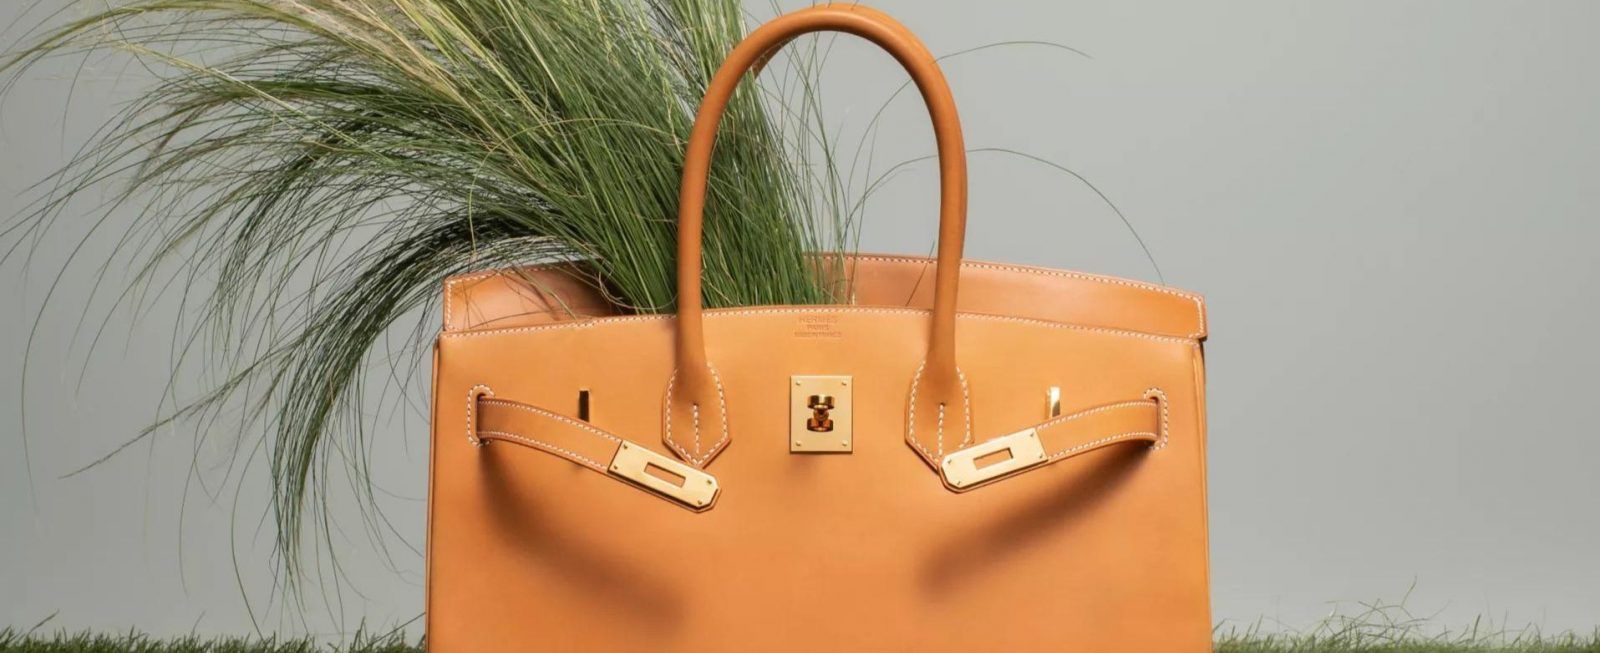 In 2023, the iconic Hermès Birkin bags will become more expensive